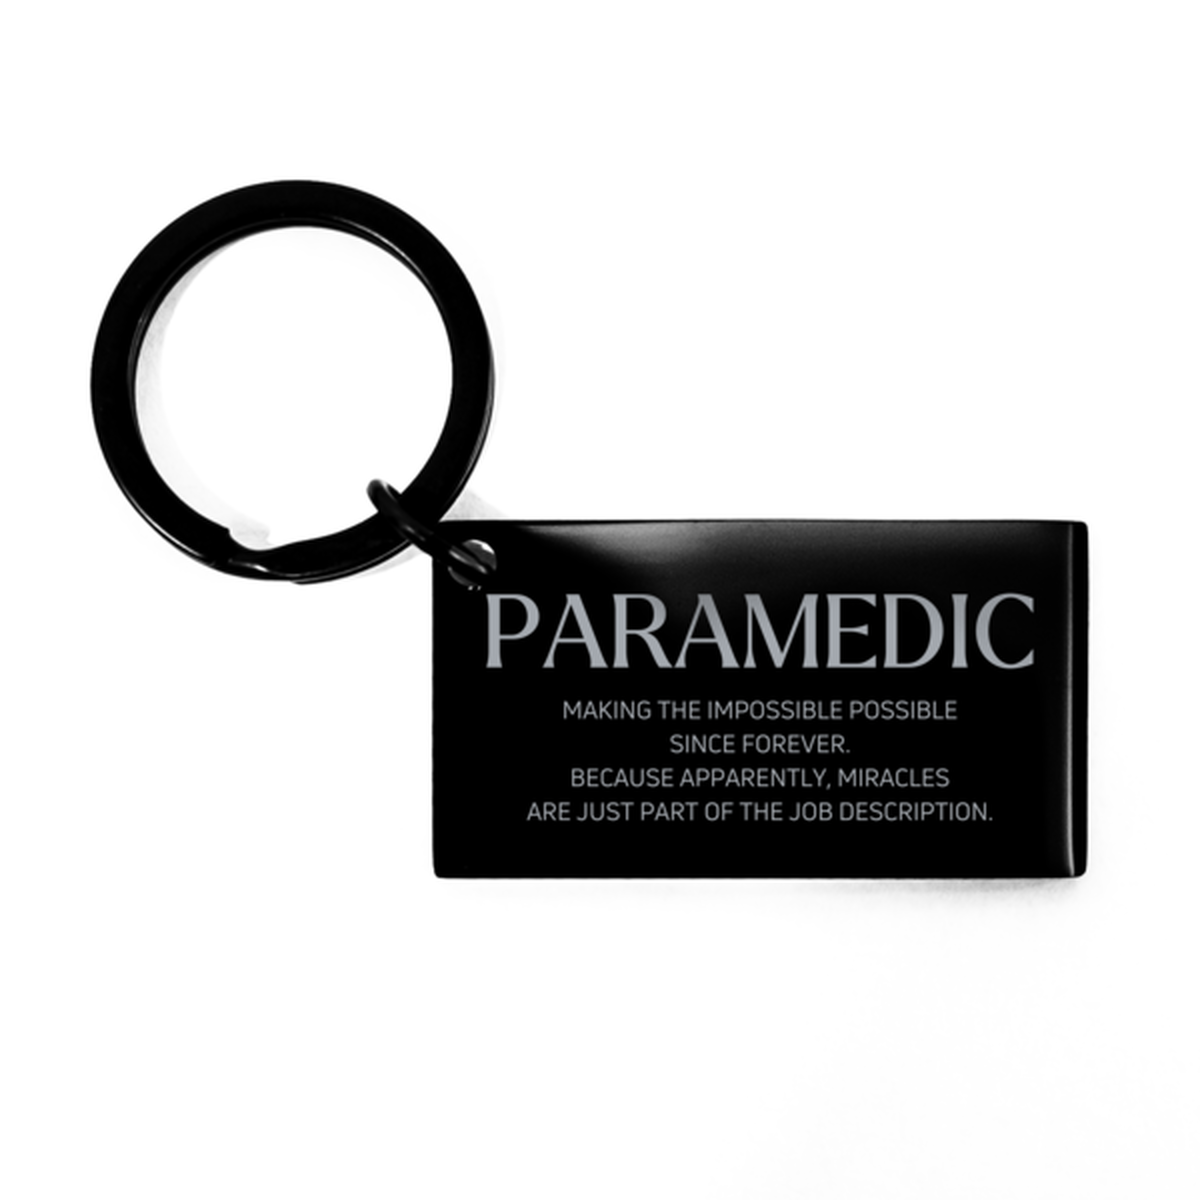 Funny Paramedic Gifts, Miracles are just part of the job description, Inspirational Birthday Keychain For Paramedic, Men, Women, Coworkers, Friends, Boss